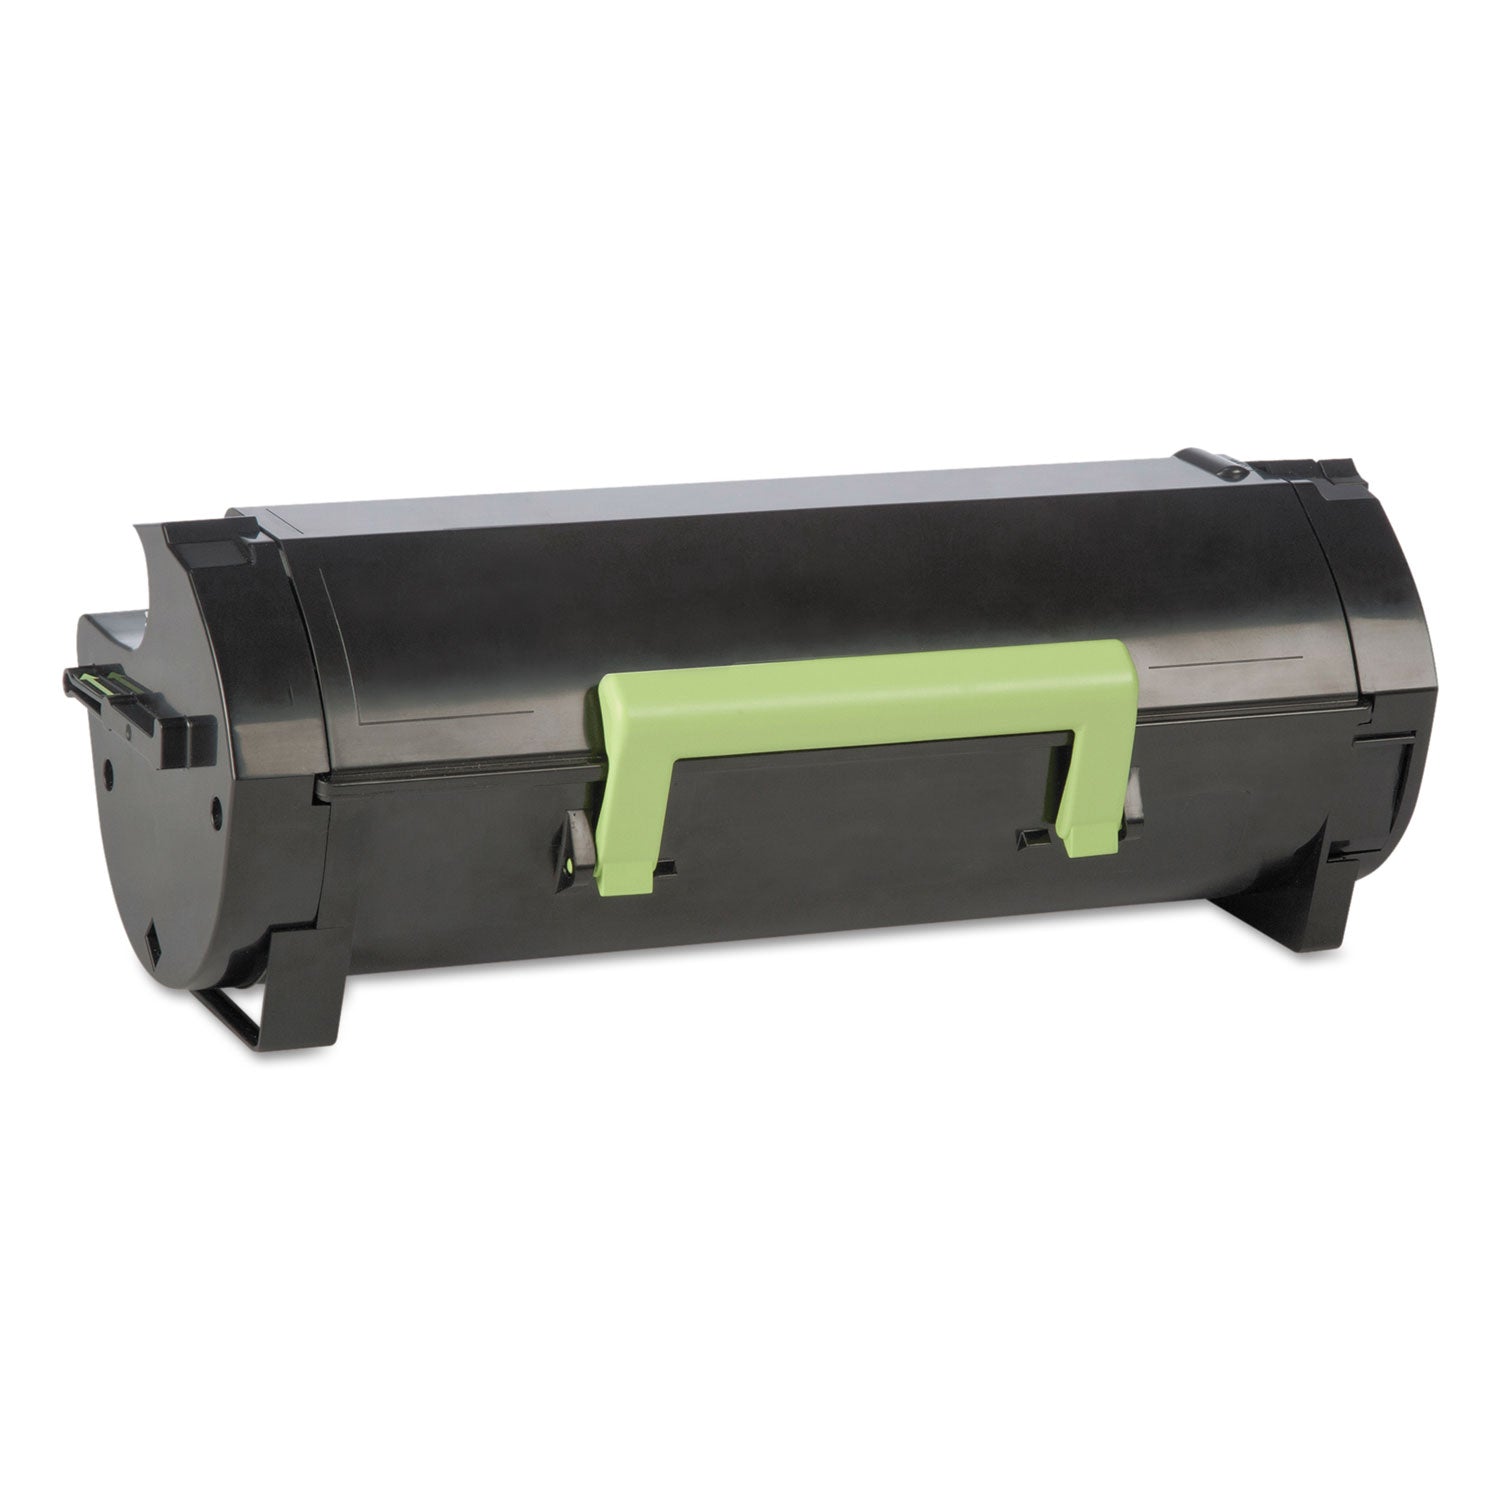 60F1H00 High-Yield Toner, 10,000 Page-Yield, Black - 